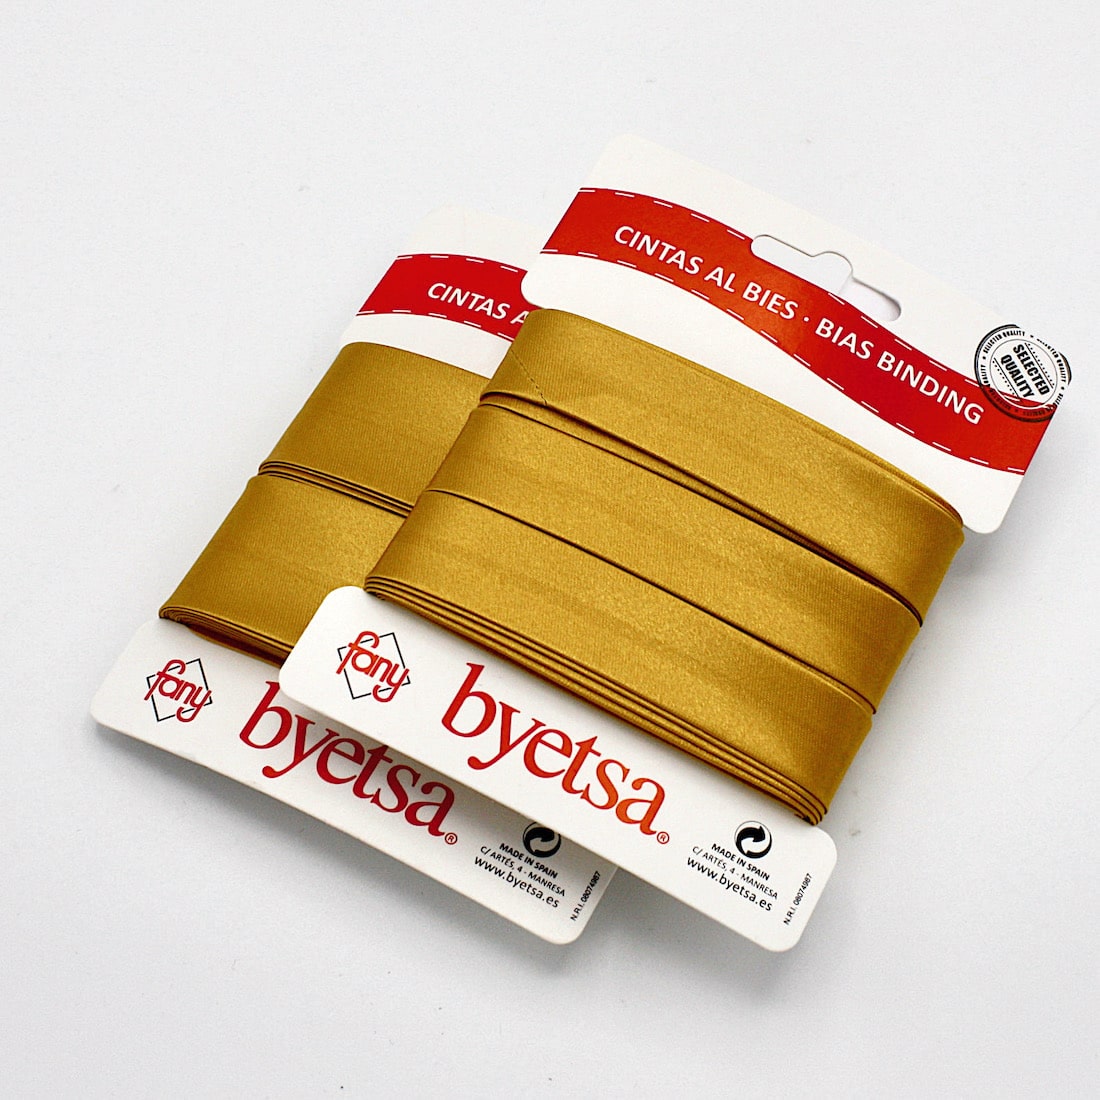 5 metres of Pre-packed Satin Bias Binding Tape in 18mm and 30mm width in Rich Gold 439